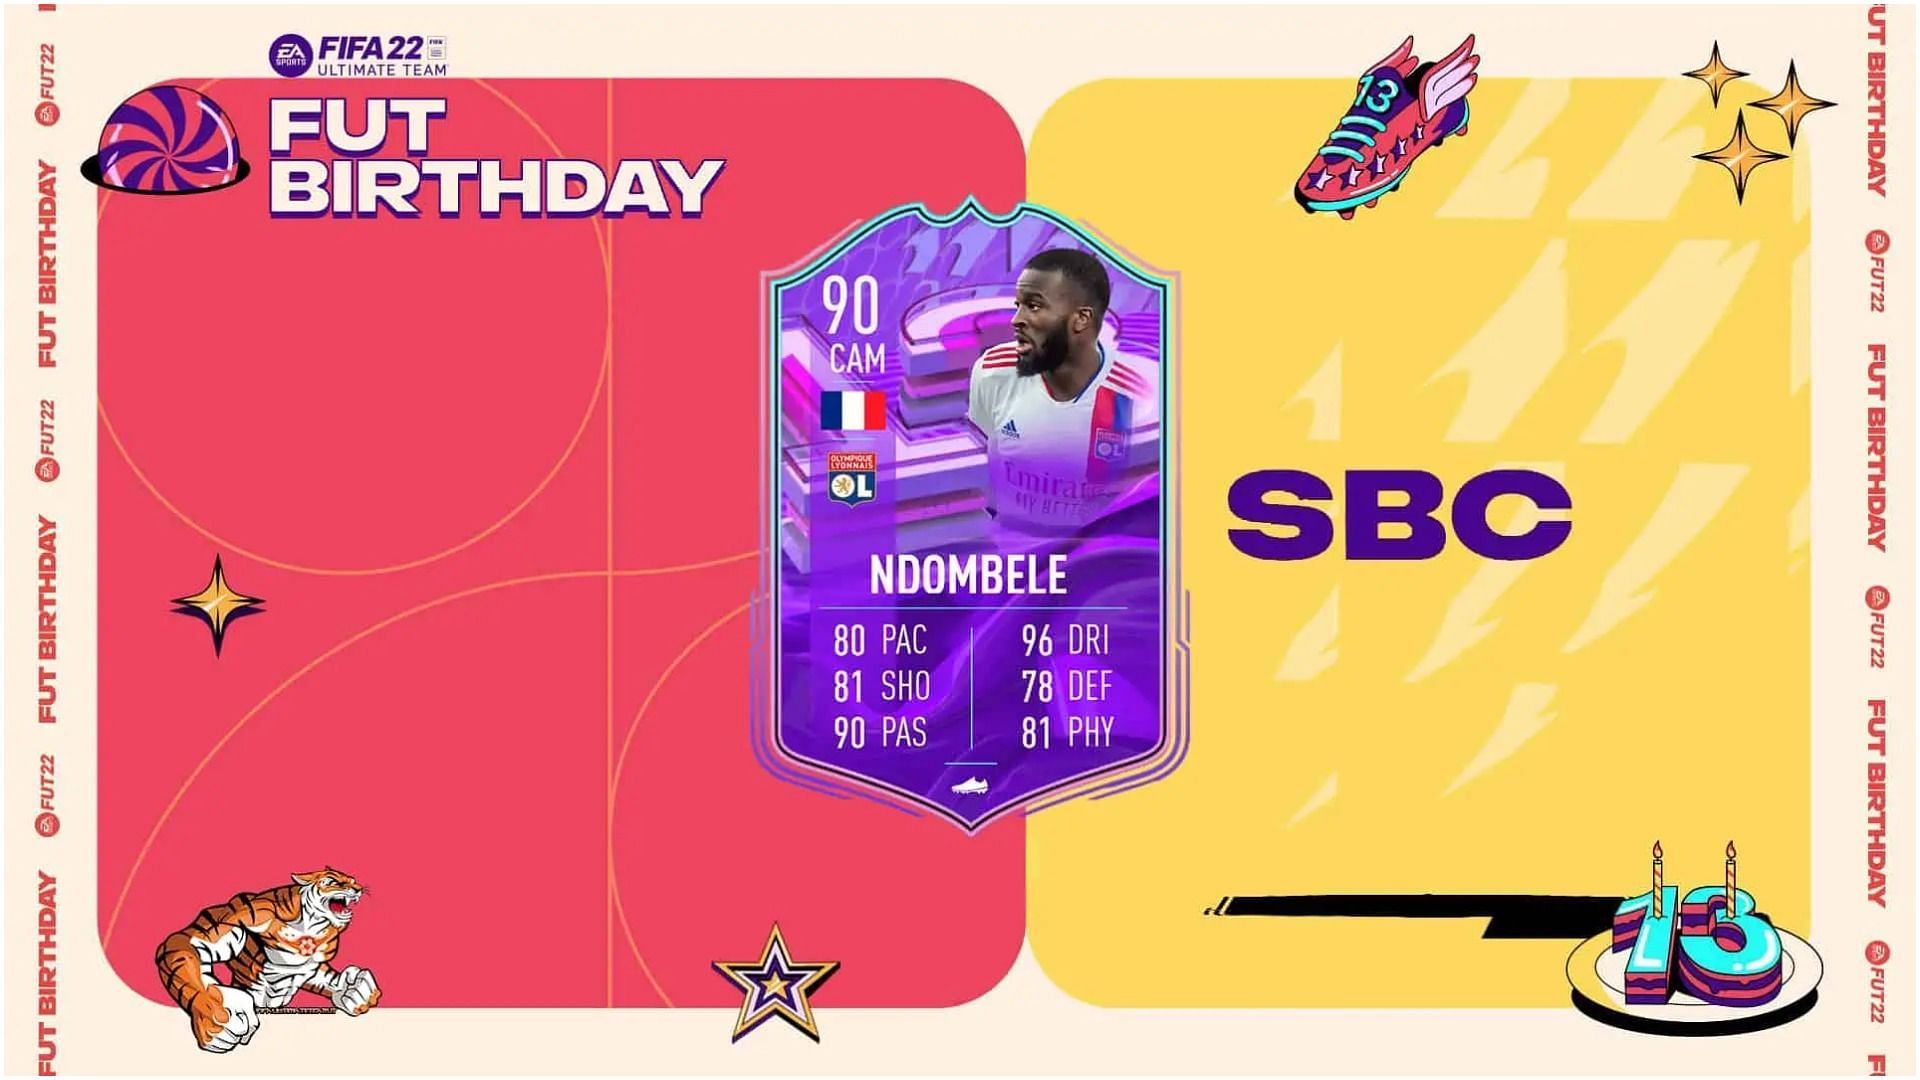 FUT Birthday Tanguy Ndombele SBC is now live in FIFA 22 Ultimate Team (Image via EA Sports)